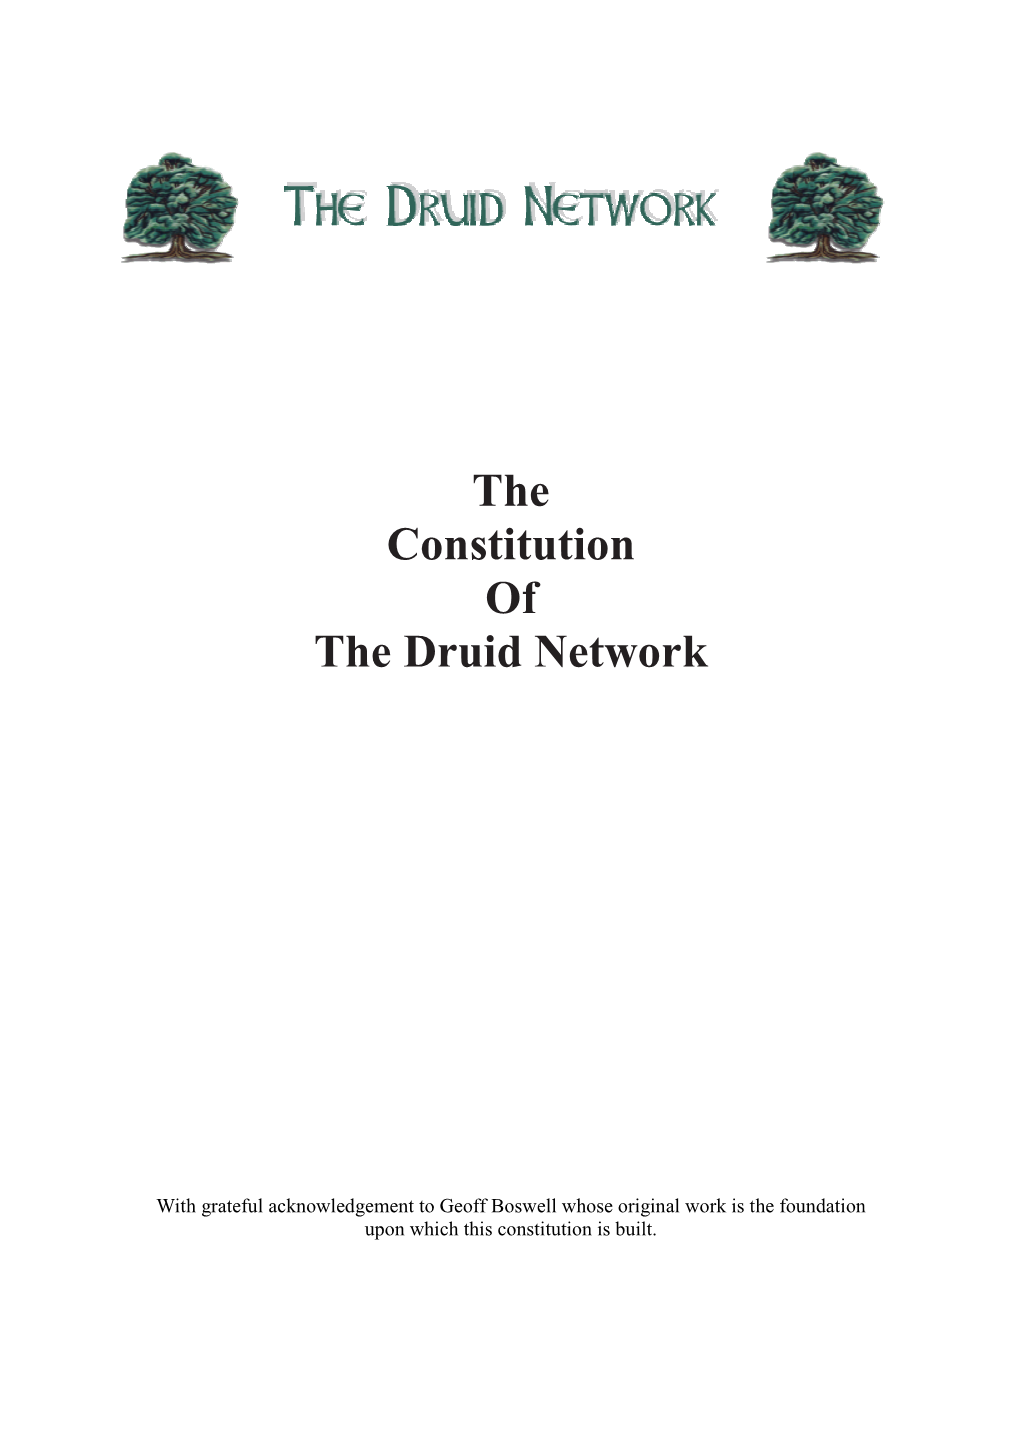 The Constitution of the Druid Network